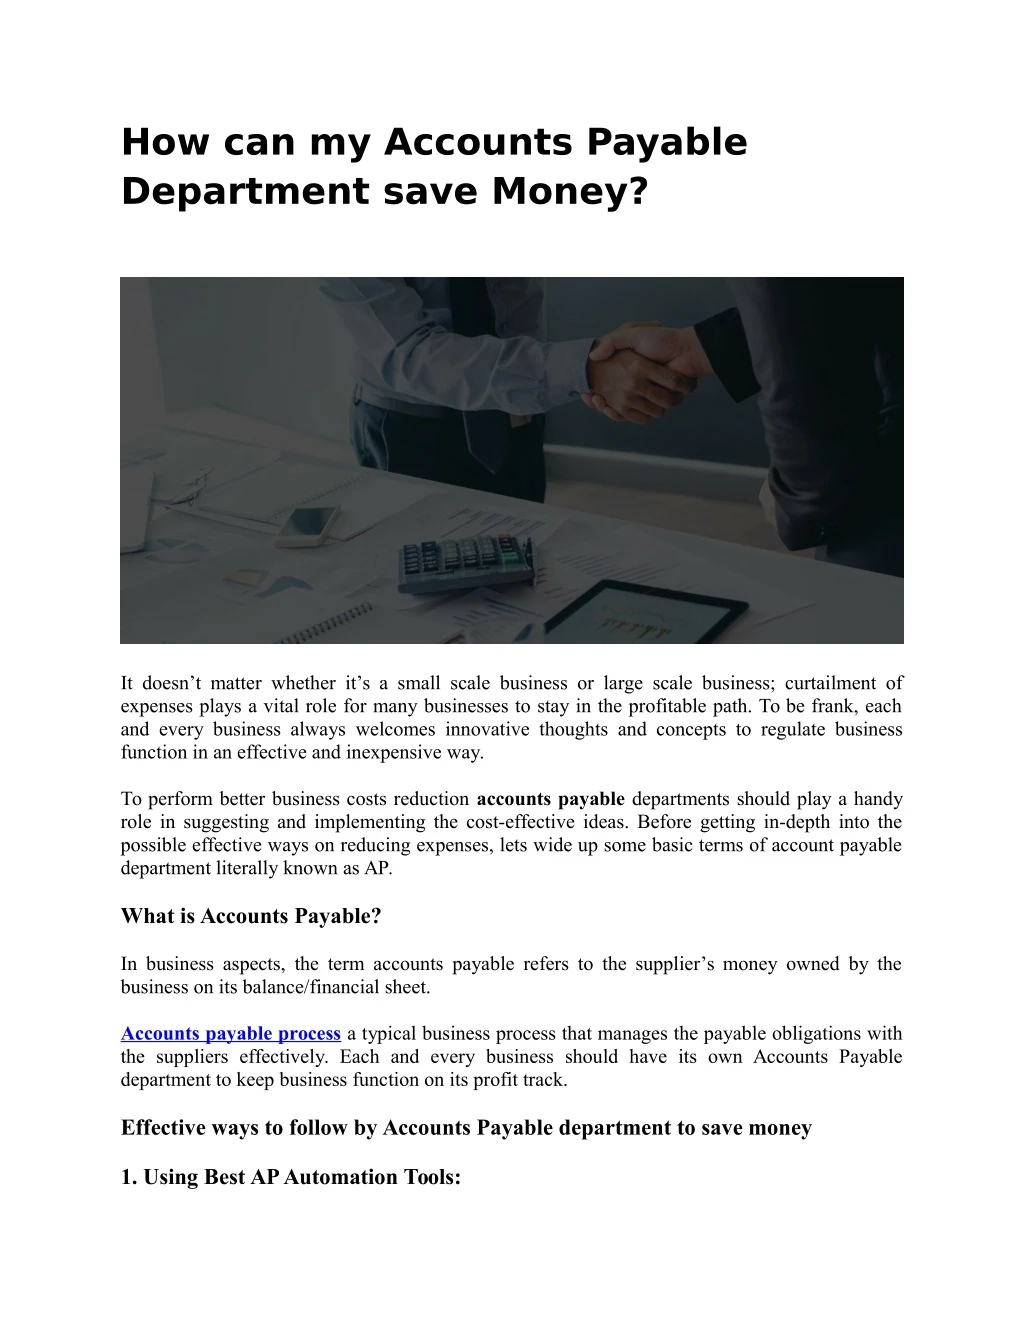 how can my accounts payable department save money